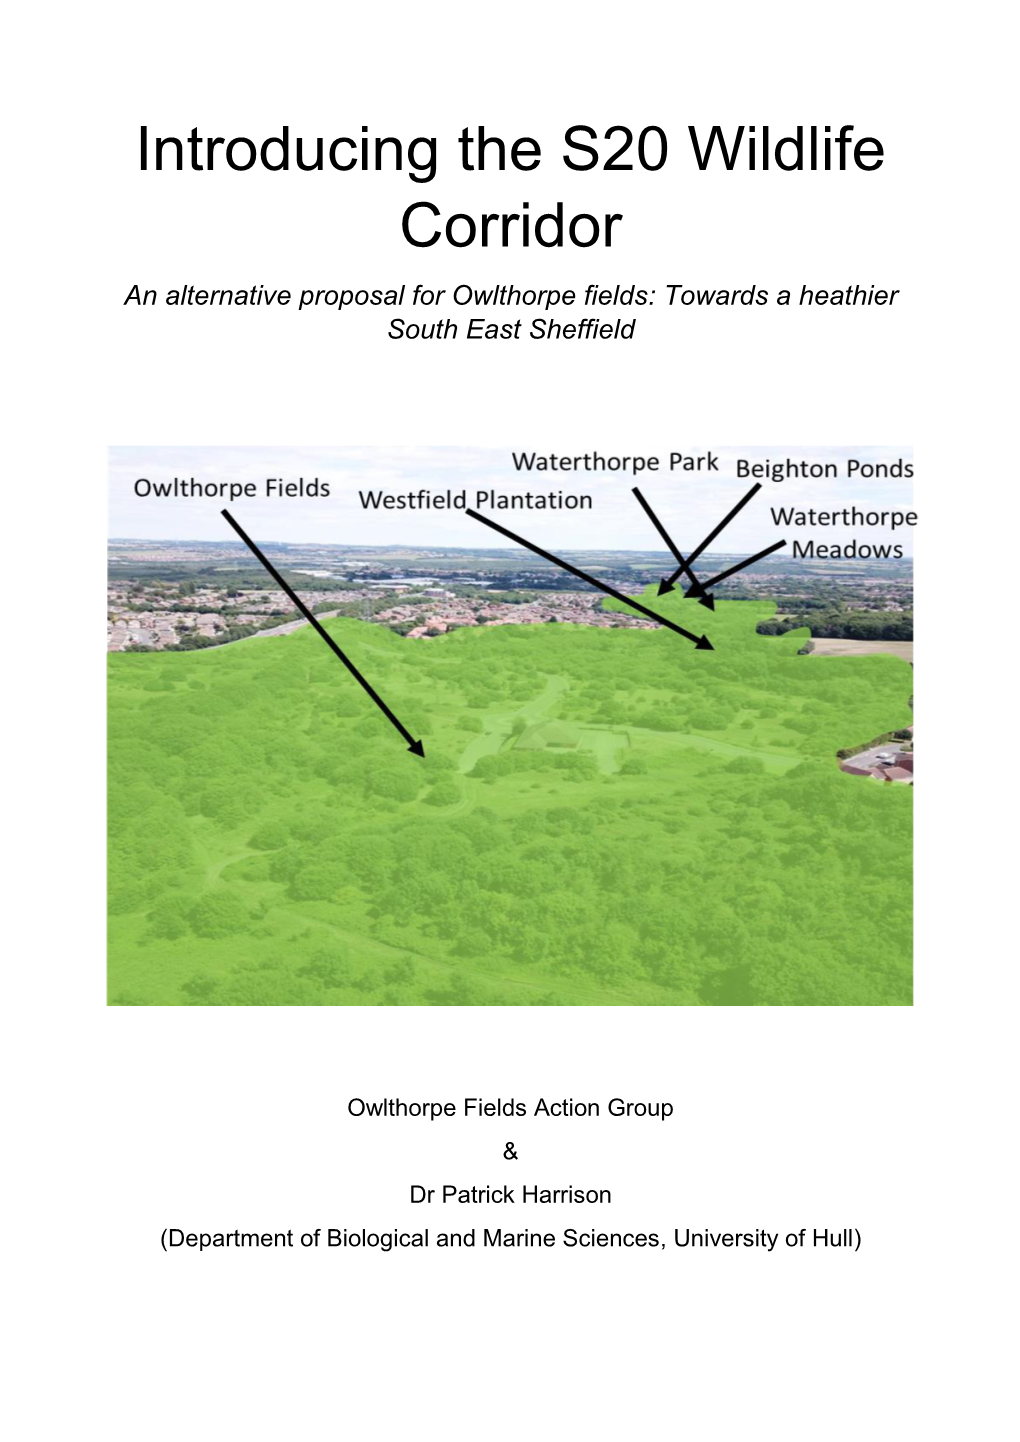 Introducing the S20 Wildlife Corridor an Alternative Proposal for Owlthorpe Fields: Towards a Heathier South East Sheffield